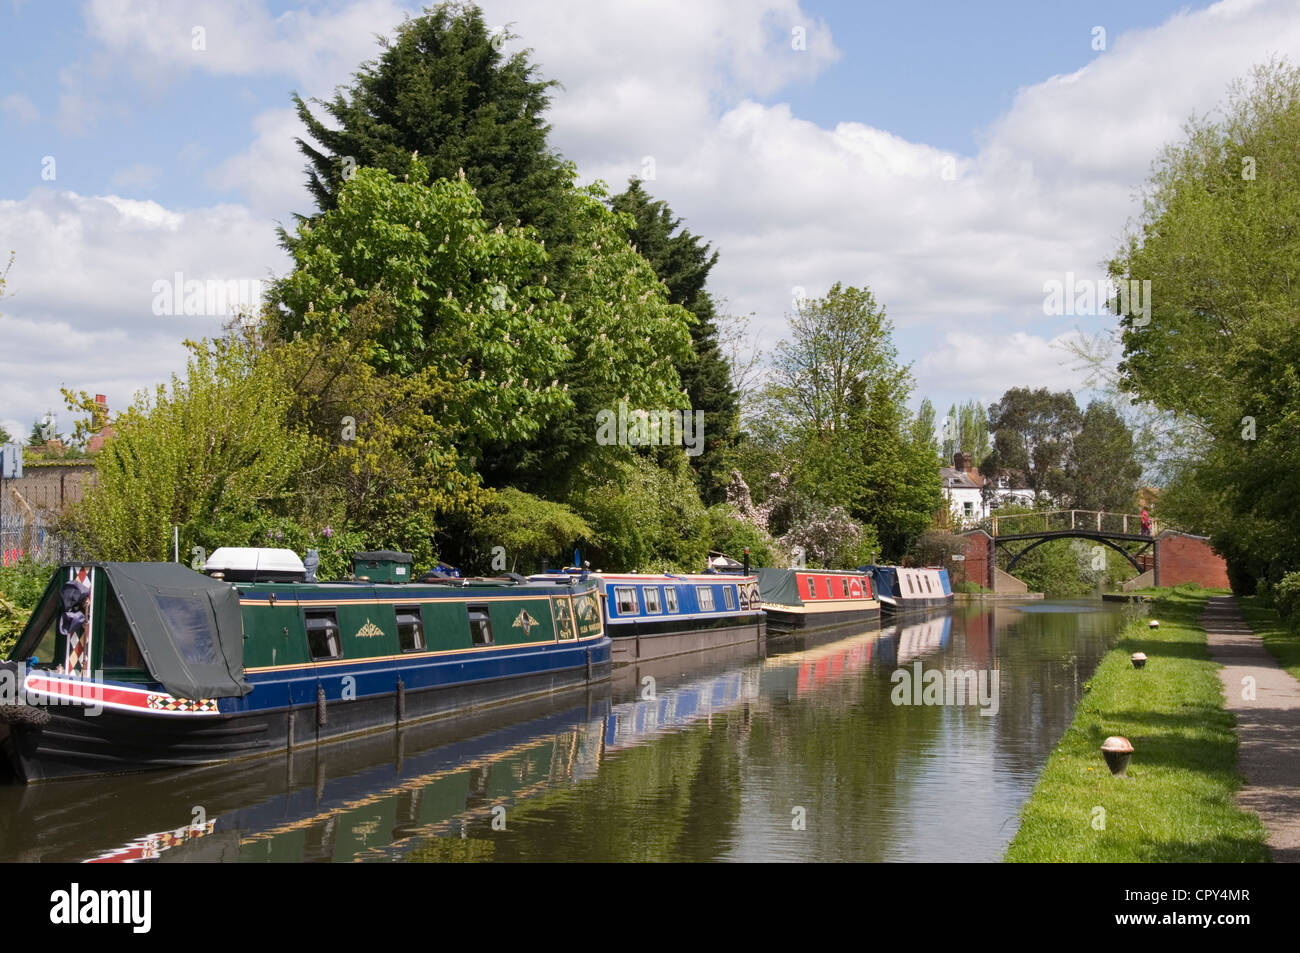 Bucks - Aylesbury Arm of GUC canal - view of the waterway - moored canal boats - distant bridge - trees - sunlight - blue sky Stock Photo